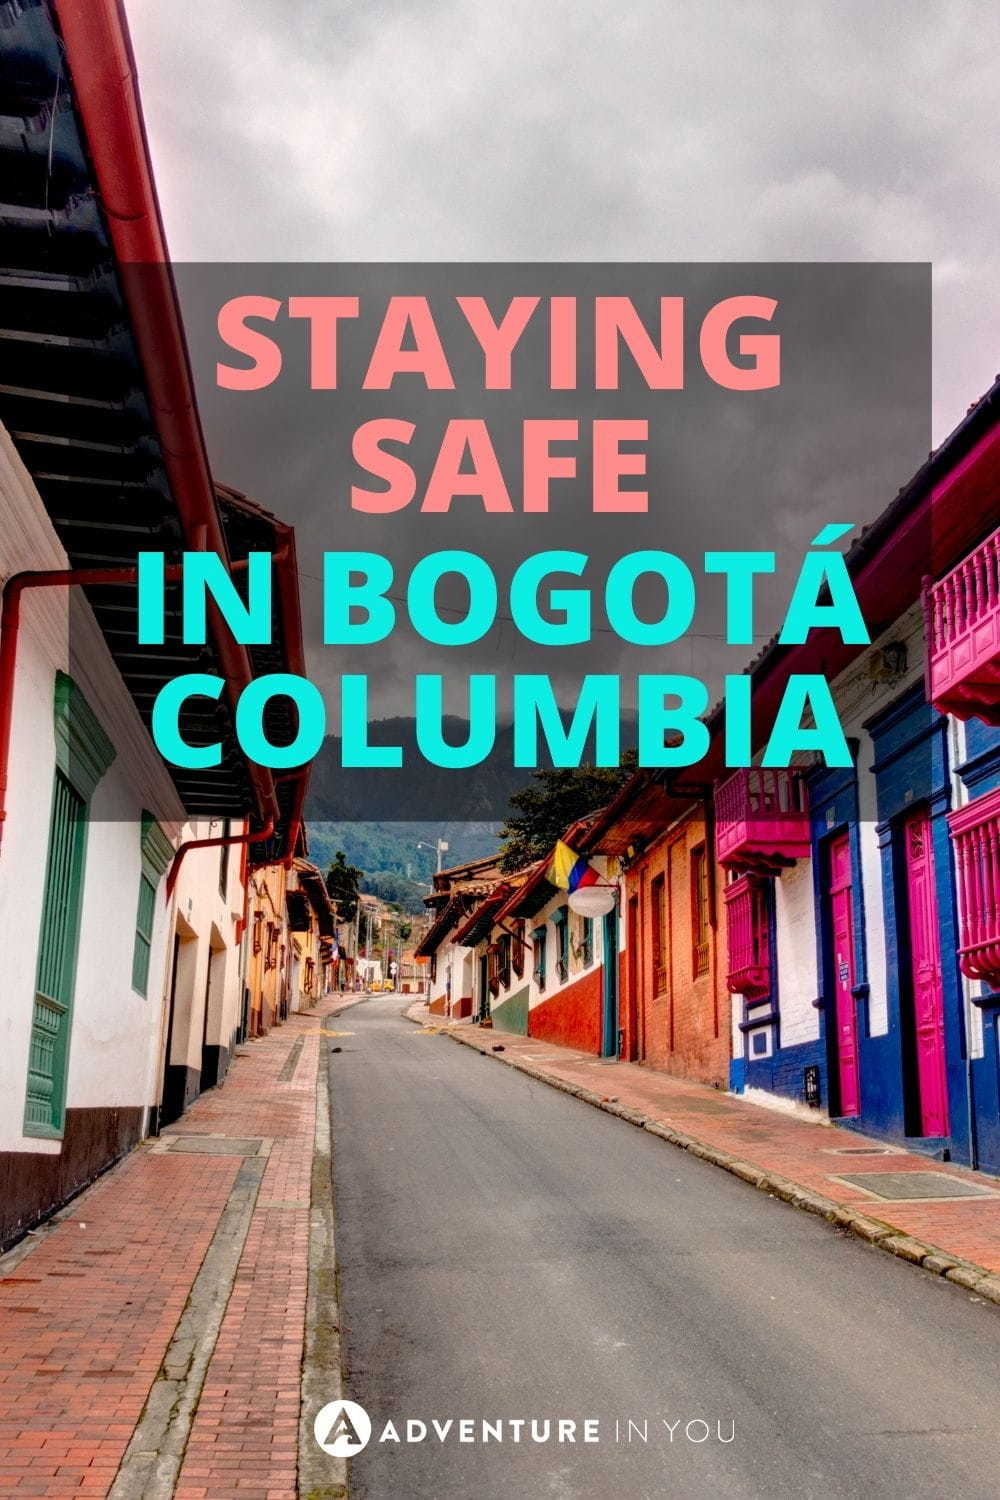 Is Bogotá Safe to Visit? | Curious about safety when it comes to traveling in Bogota, Columbia? Here's everything you need to know about staying safe on your visit to this amazing country! #bogota #columbia